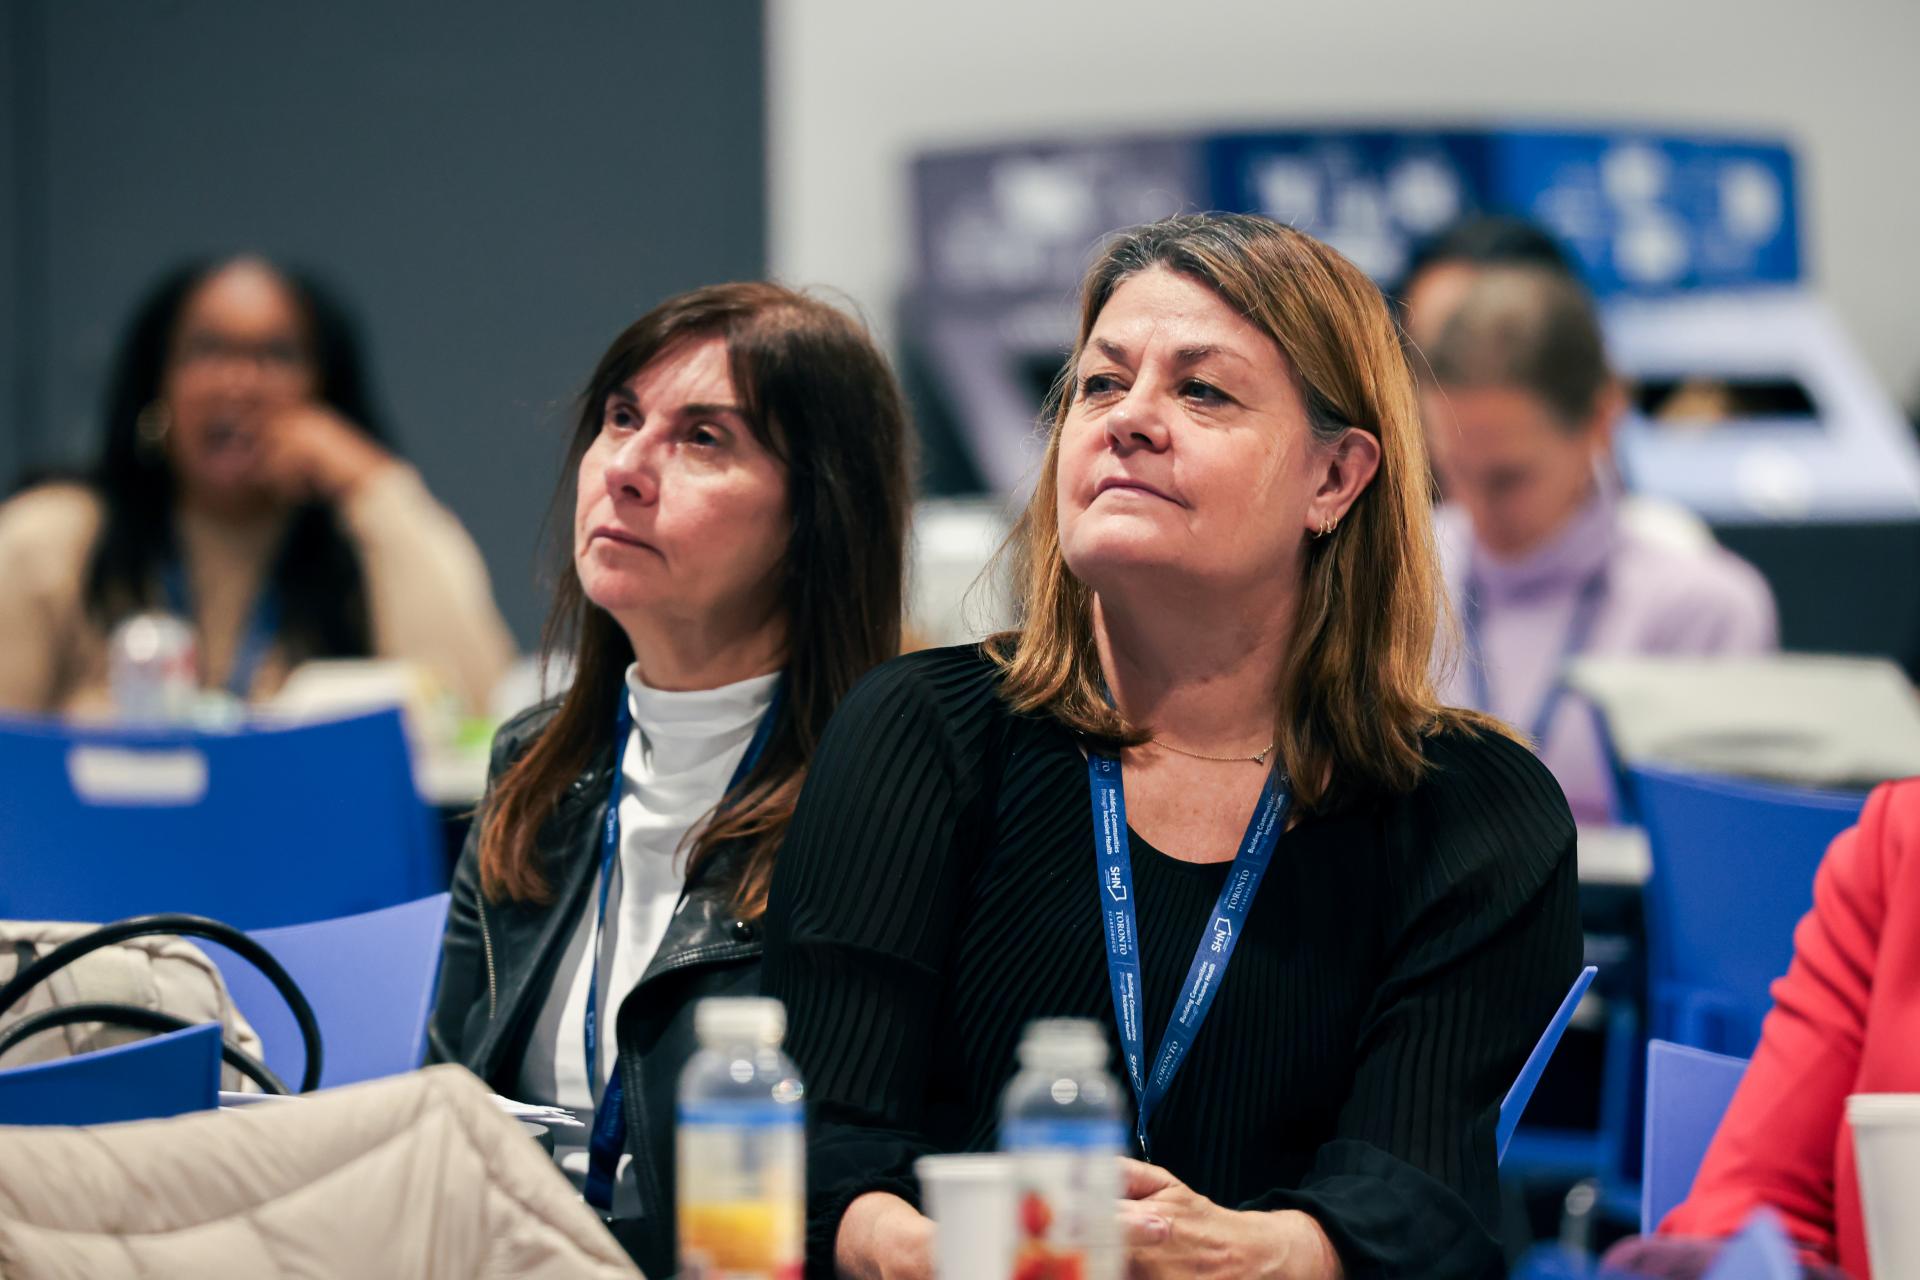 Irena Creed and Adriana Carvalhal at the conference